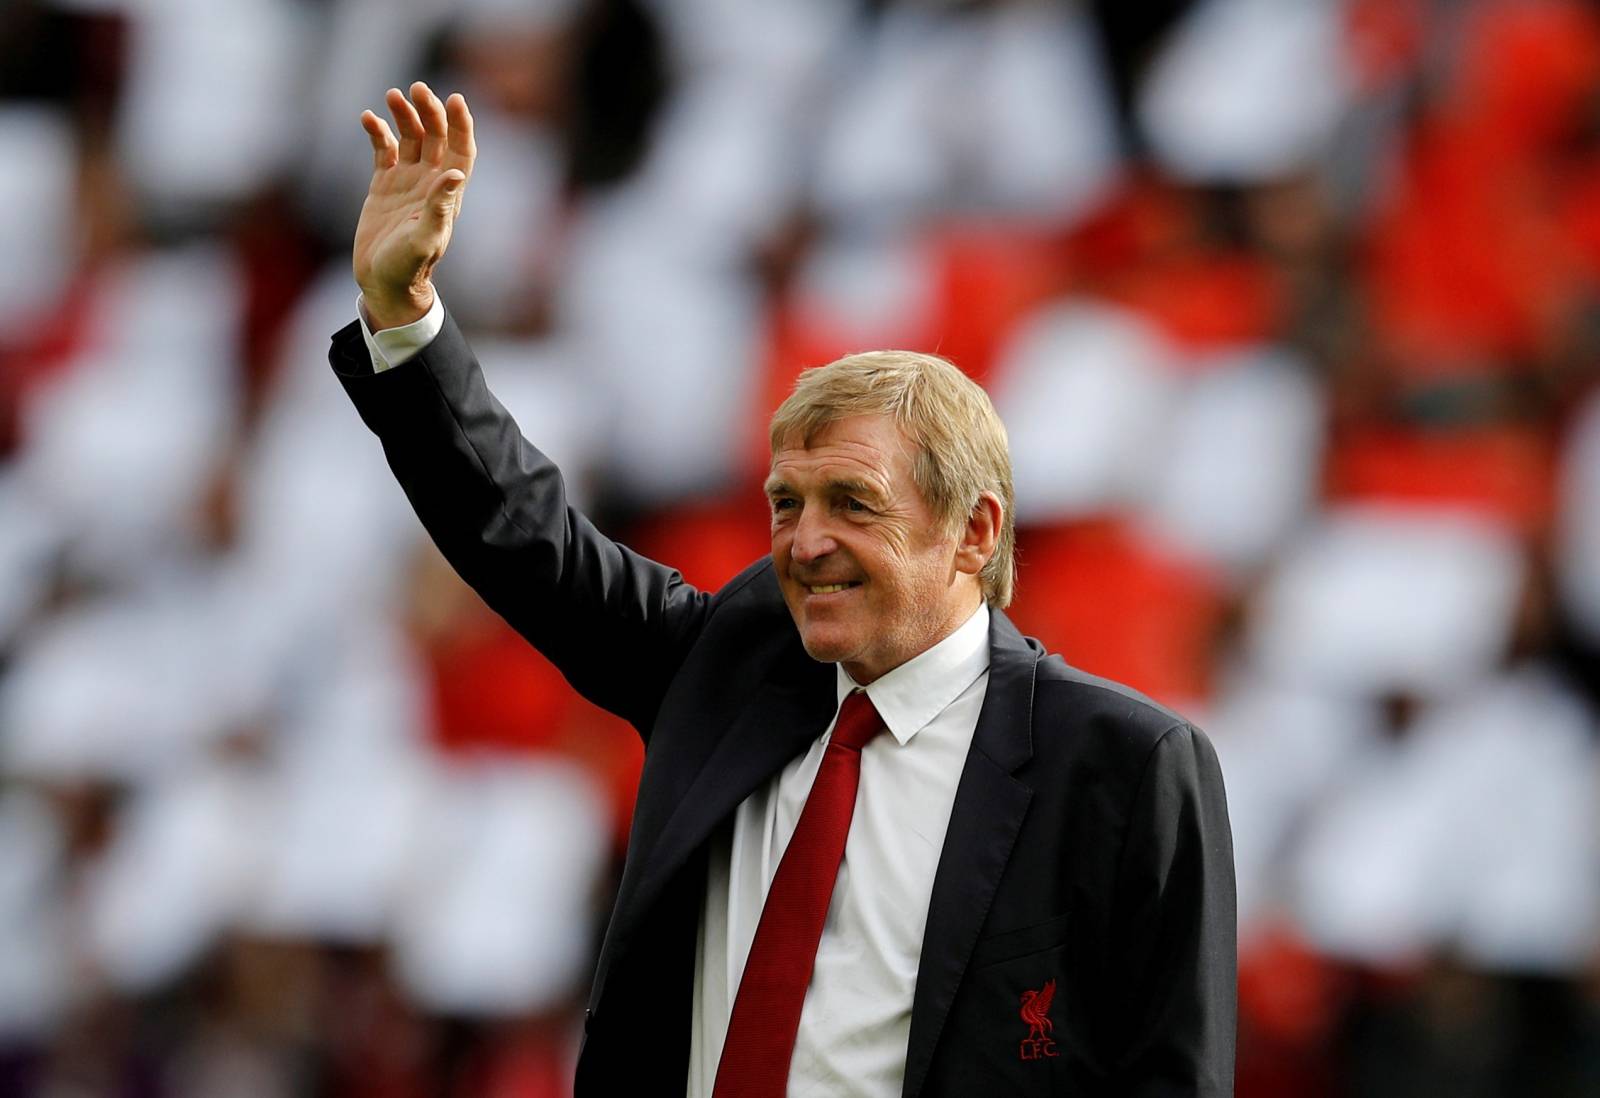 FILE PHOTO: Kenny Dalglish waves to fans before Liverpool's match with Manchester United